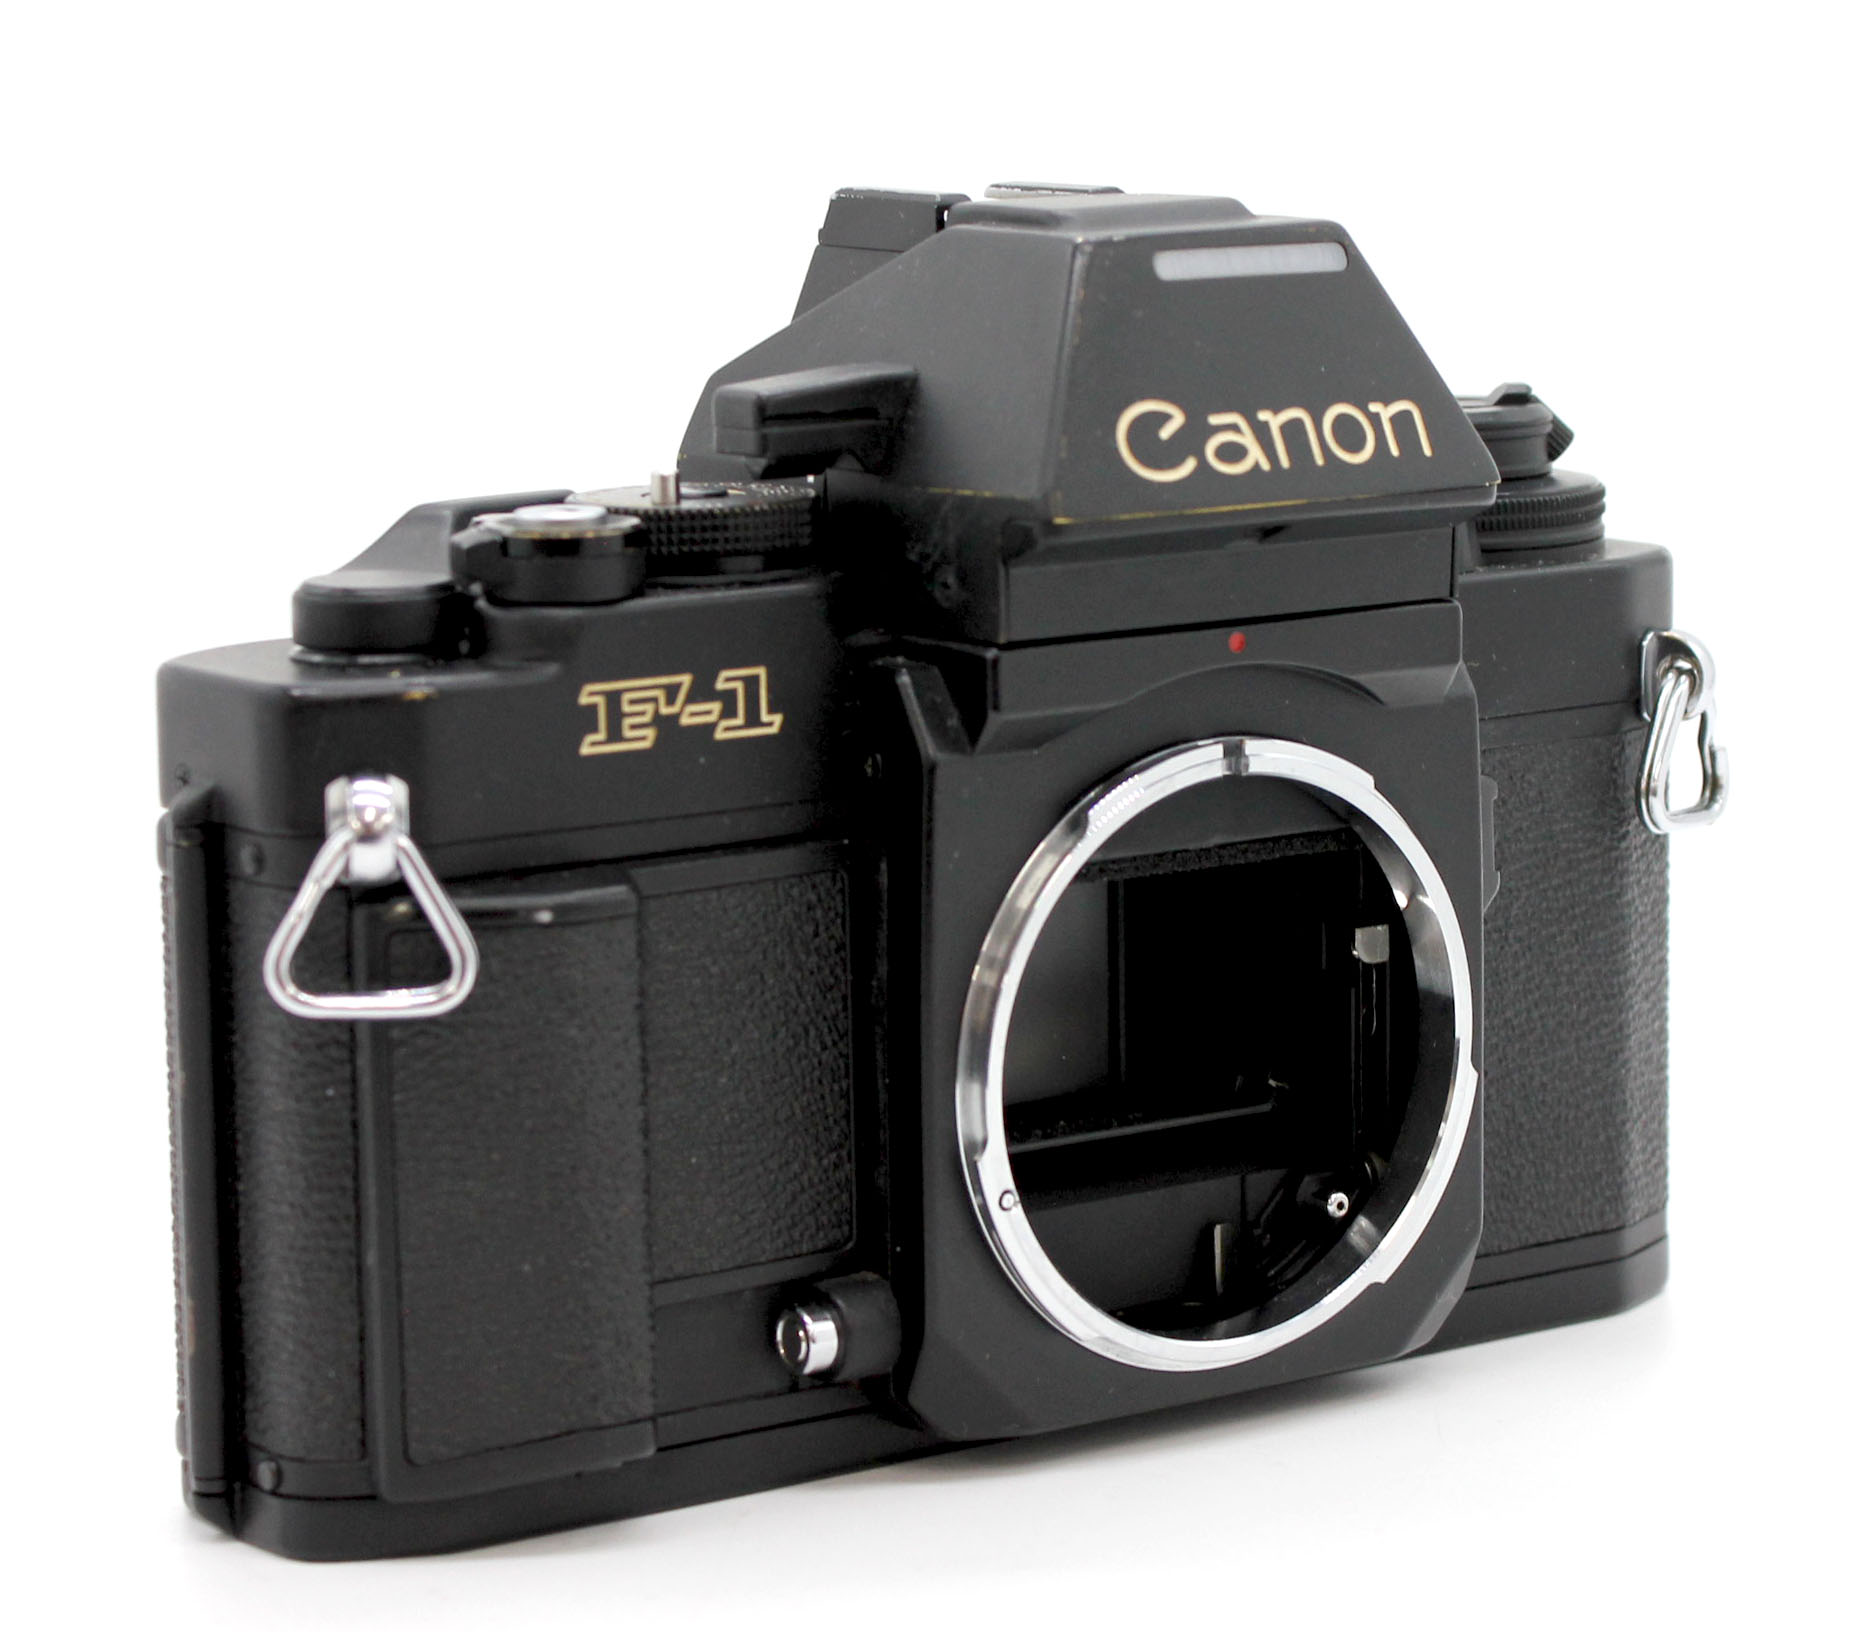  Canon New F-1 AE Finder 35mm SLR Film Camera with FD 50mm F/1.4 S.S.C. Lens from Japan Photo 2